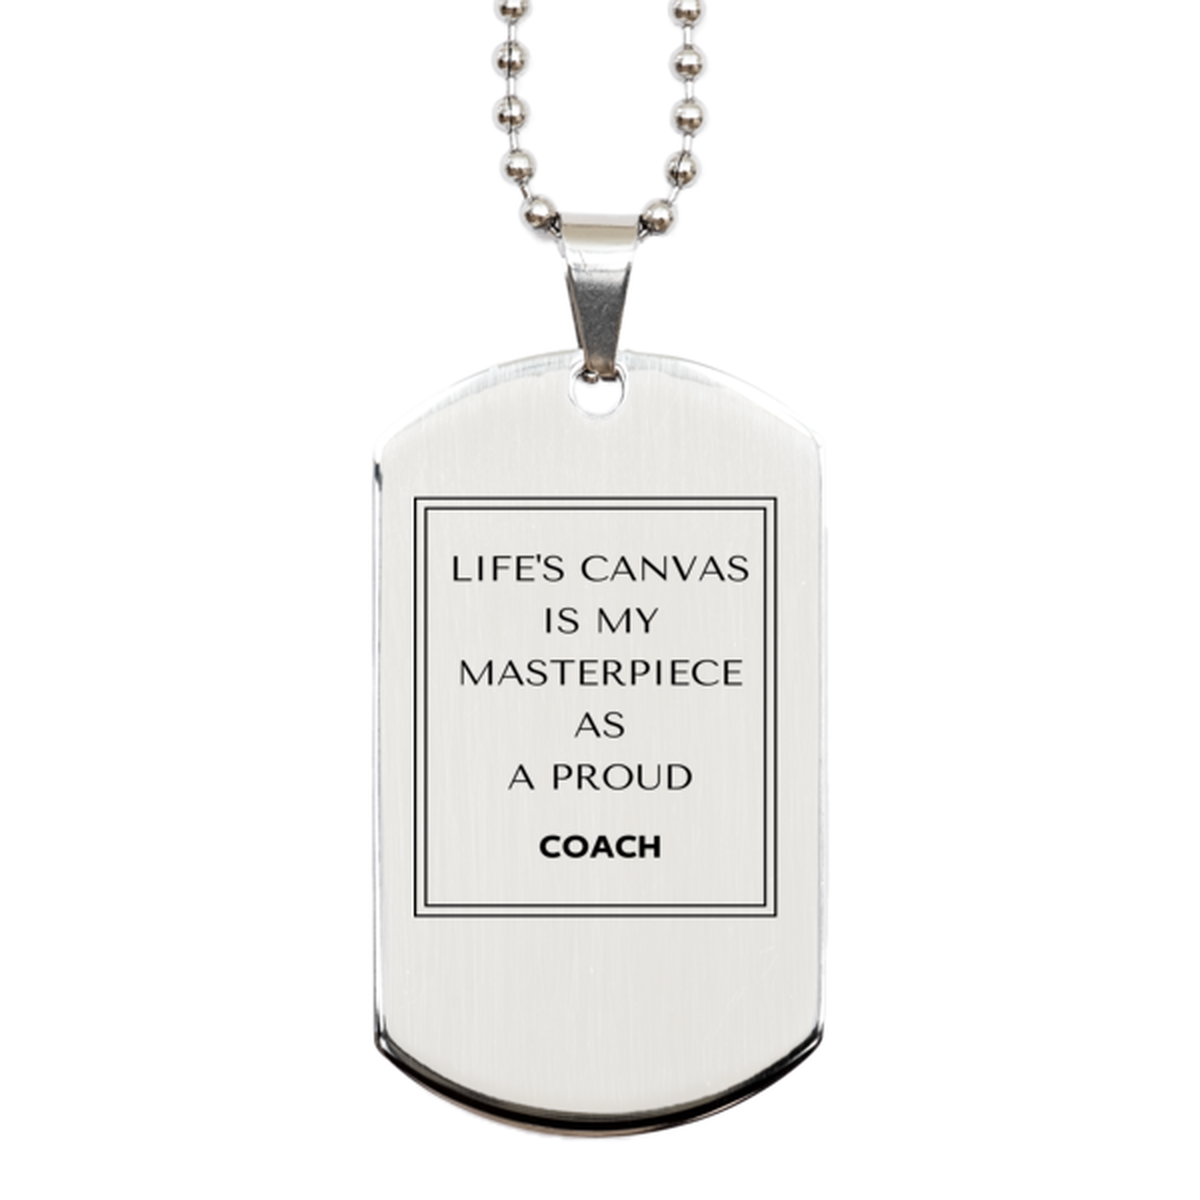 Proud Coach Gifts, Life's canvas is my masterpiece, Epic Birthday Christmas Unique Silver Dog Tag For Coach, Coworkers, Men, Women, Friends